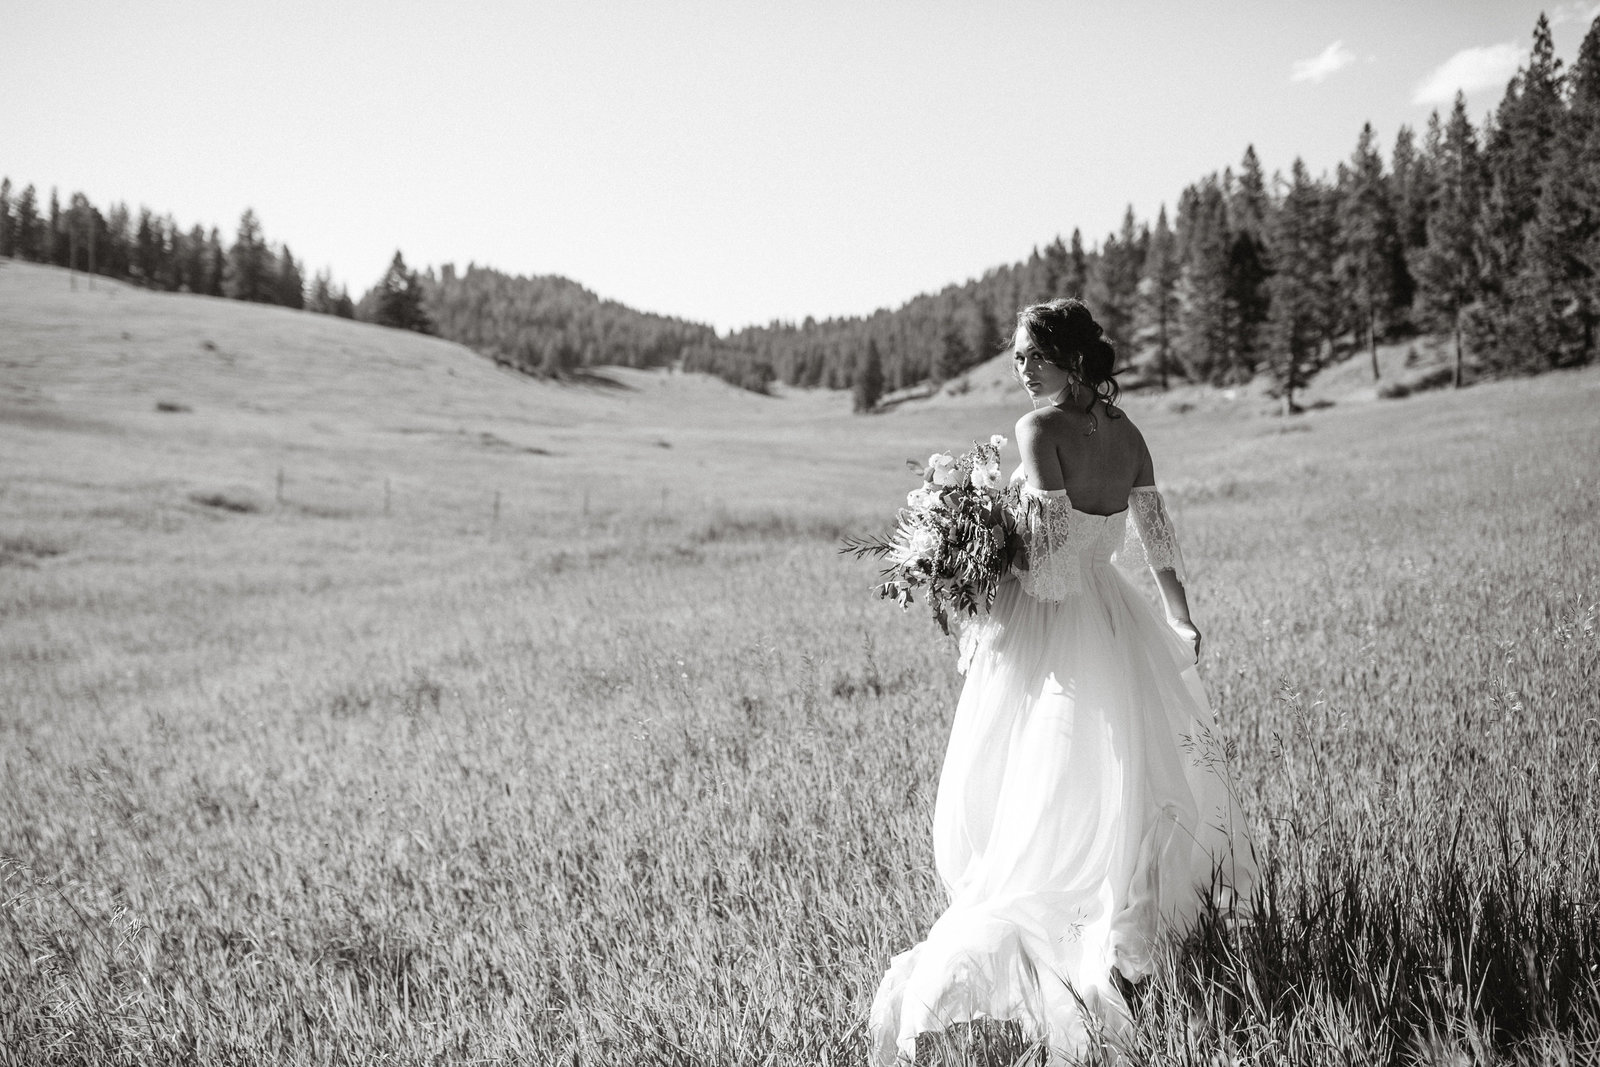 Beautiful bride photographed at this styled adventure wedding elopement, photographed by Sweetwater.